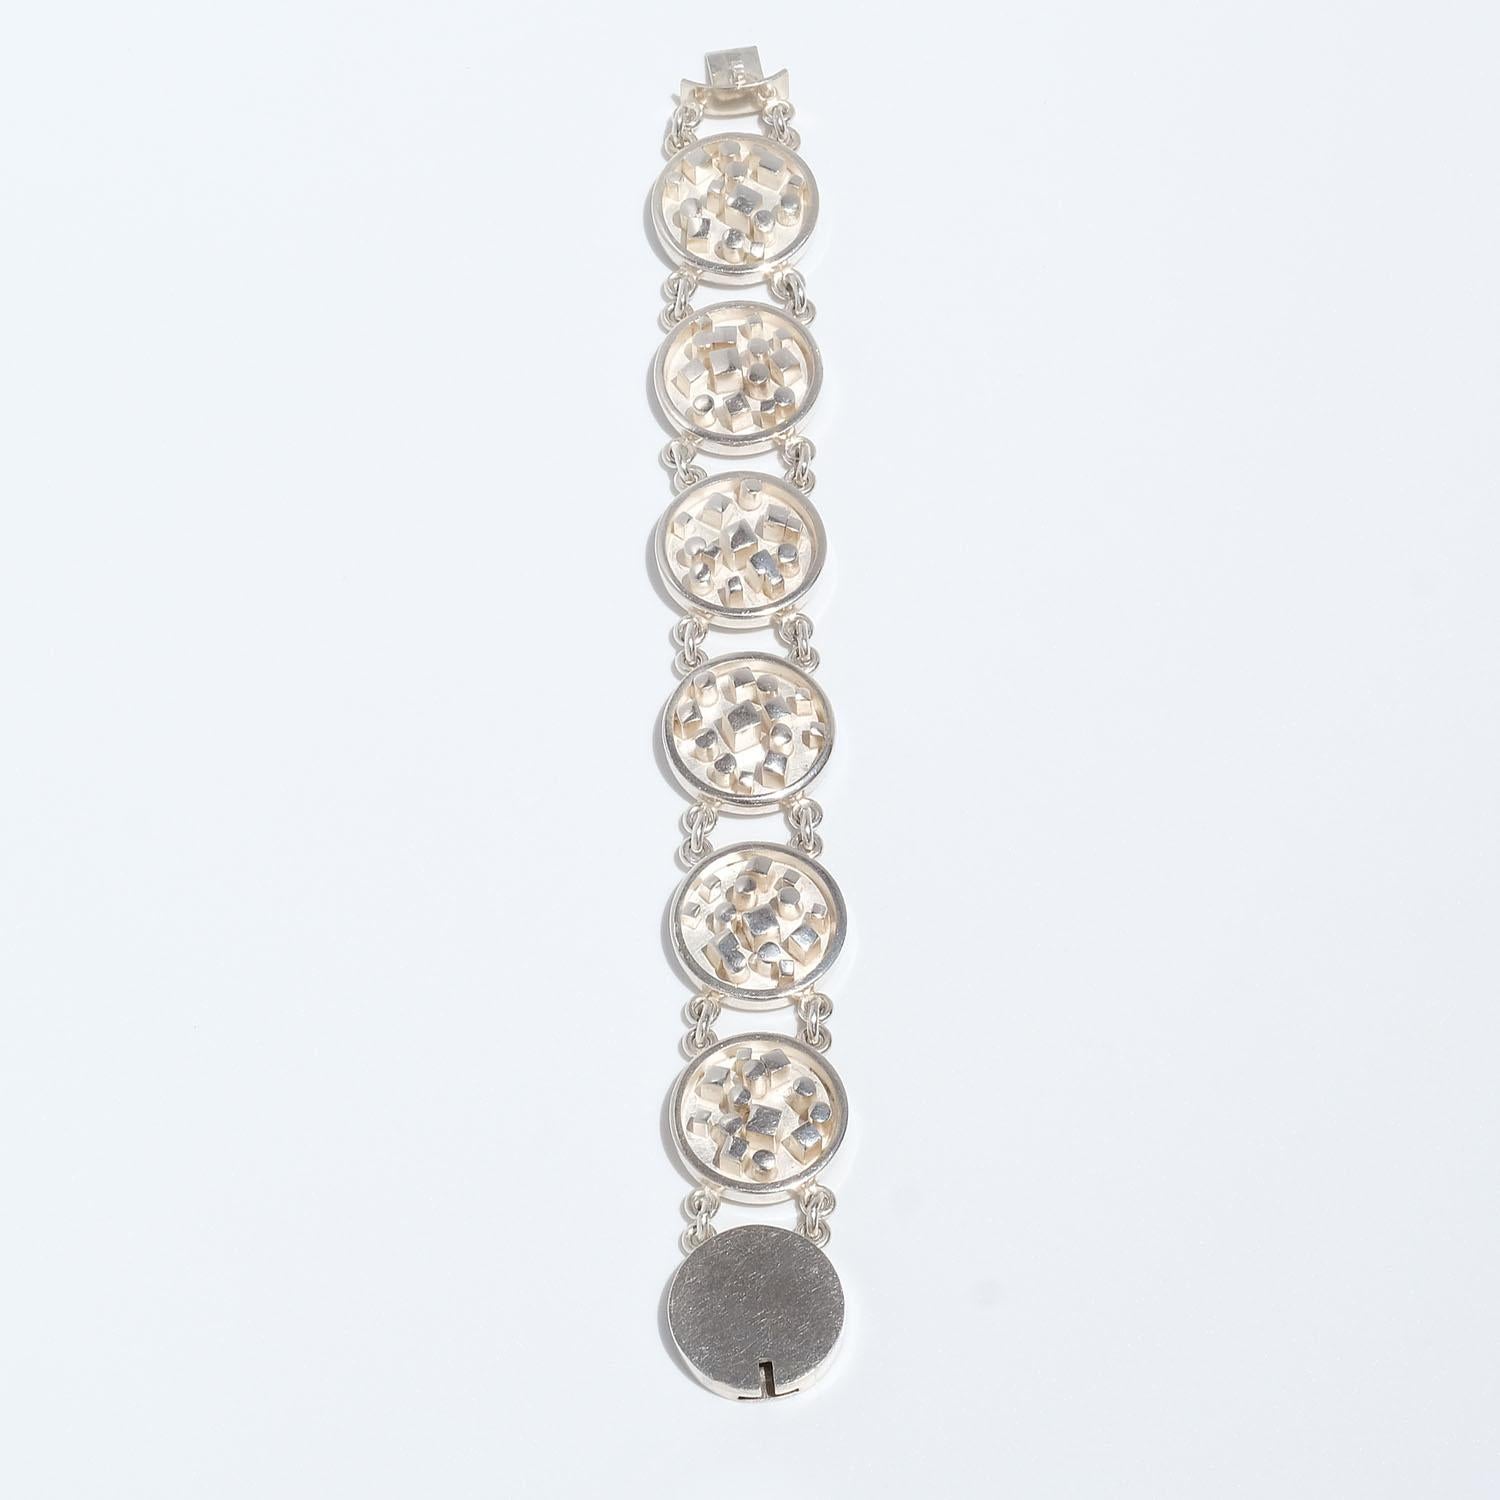 This silver bracelet is made out of six round links which are linked together. Each link is decorated with a geometric relief pattern. The bracelet closes easily with a box clasp.

The design of the bracelet is making it slide beautifully down its